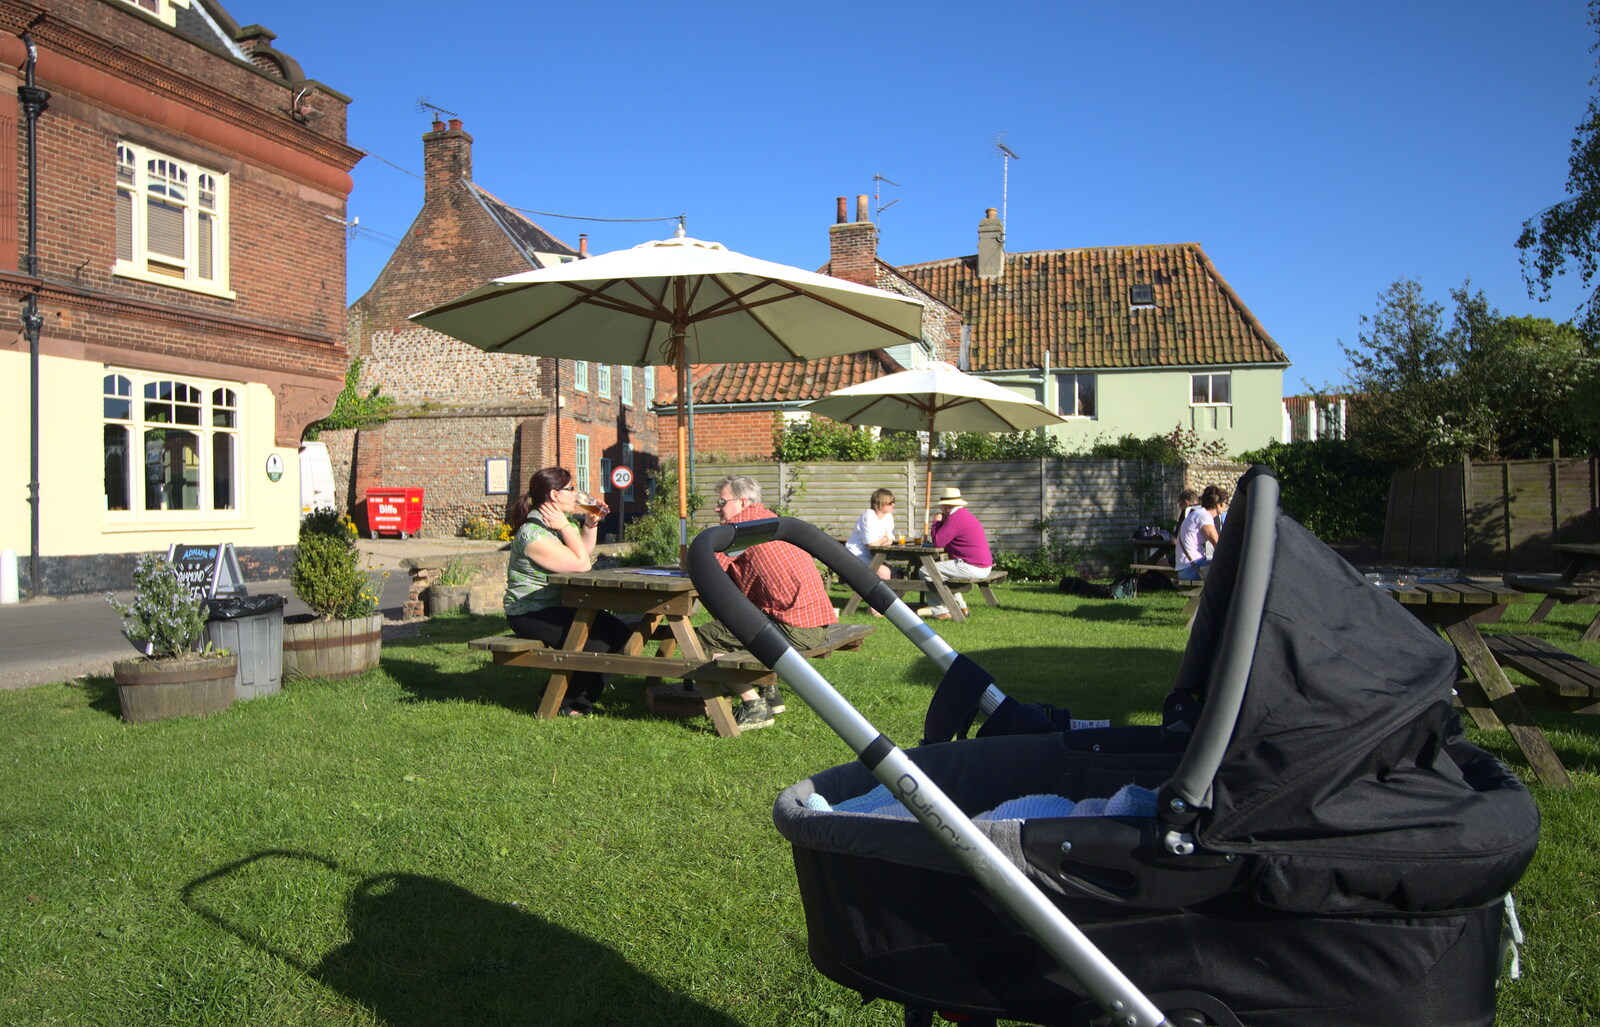 The George's beer garden from The BSCC at Needham, and a Birthday By The Sea, Cley, Norfolk - 26th May 2012